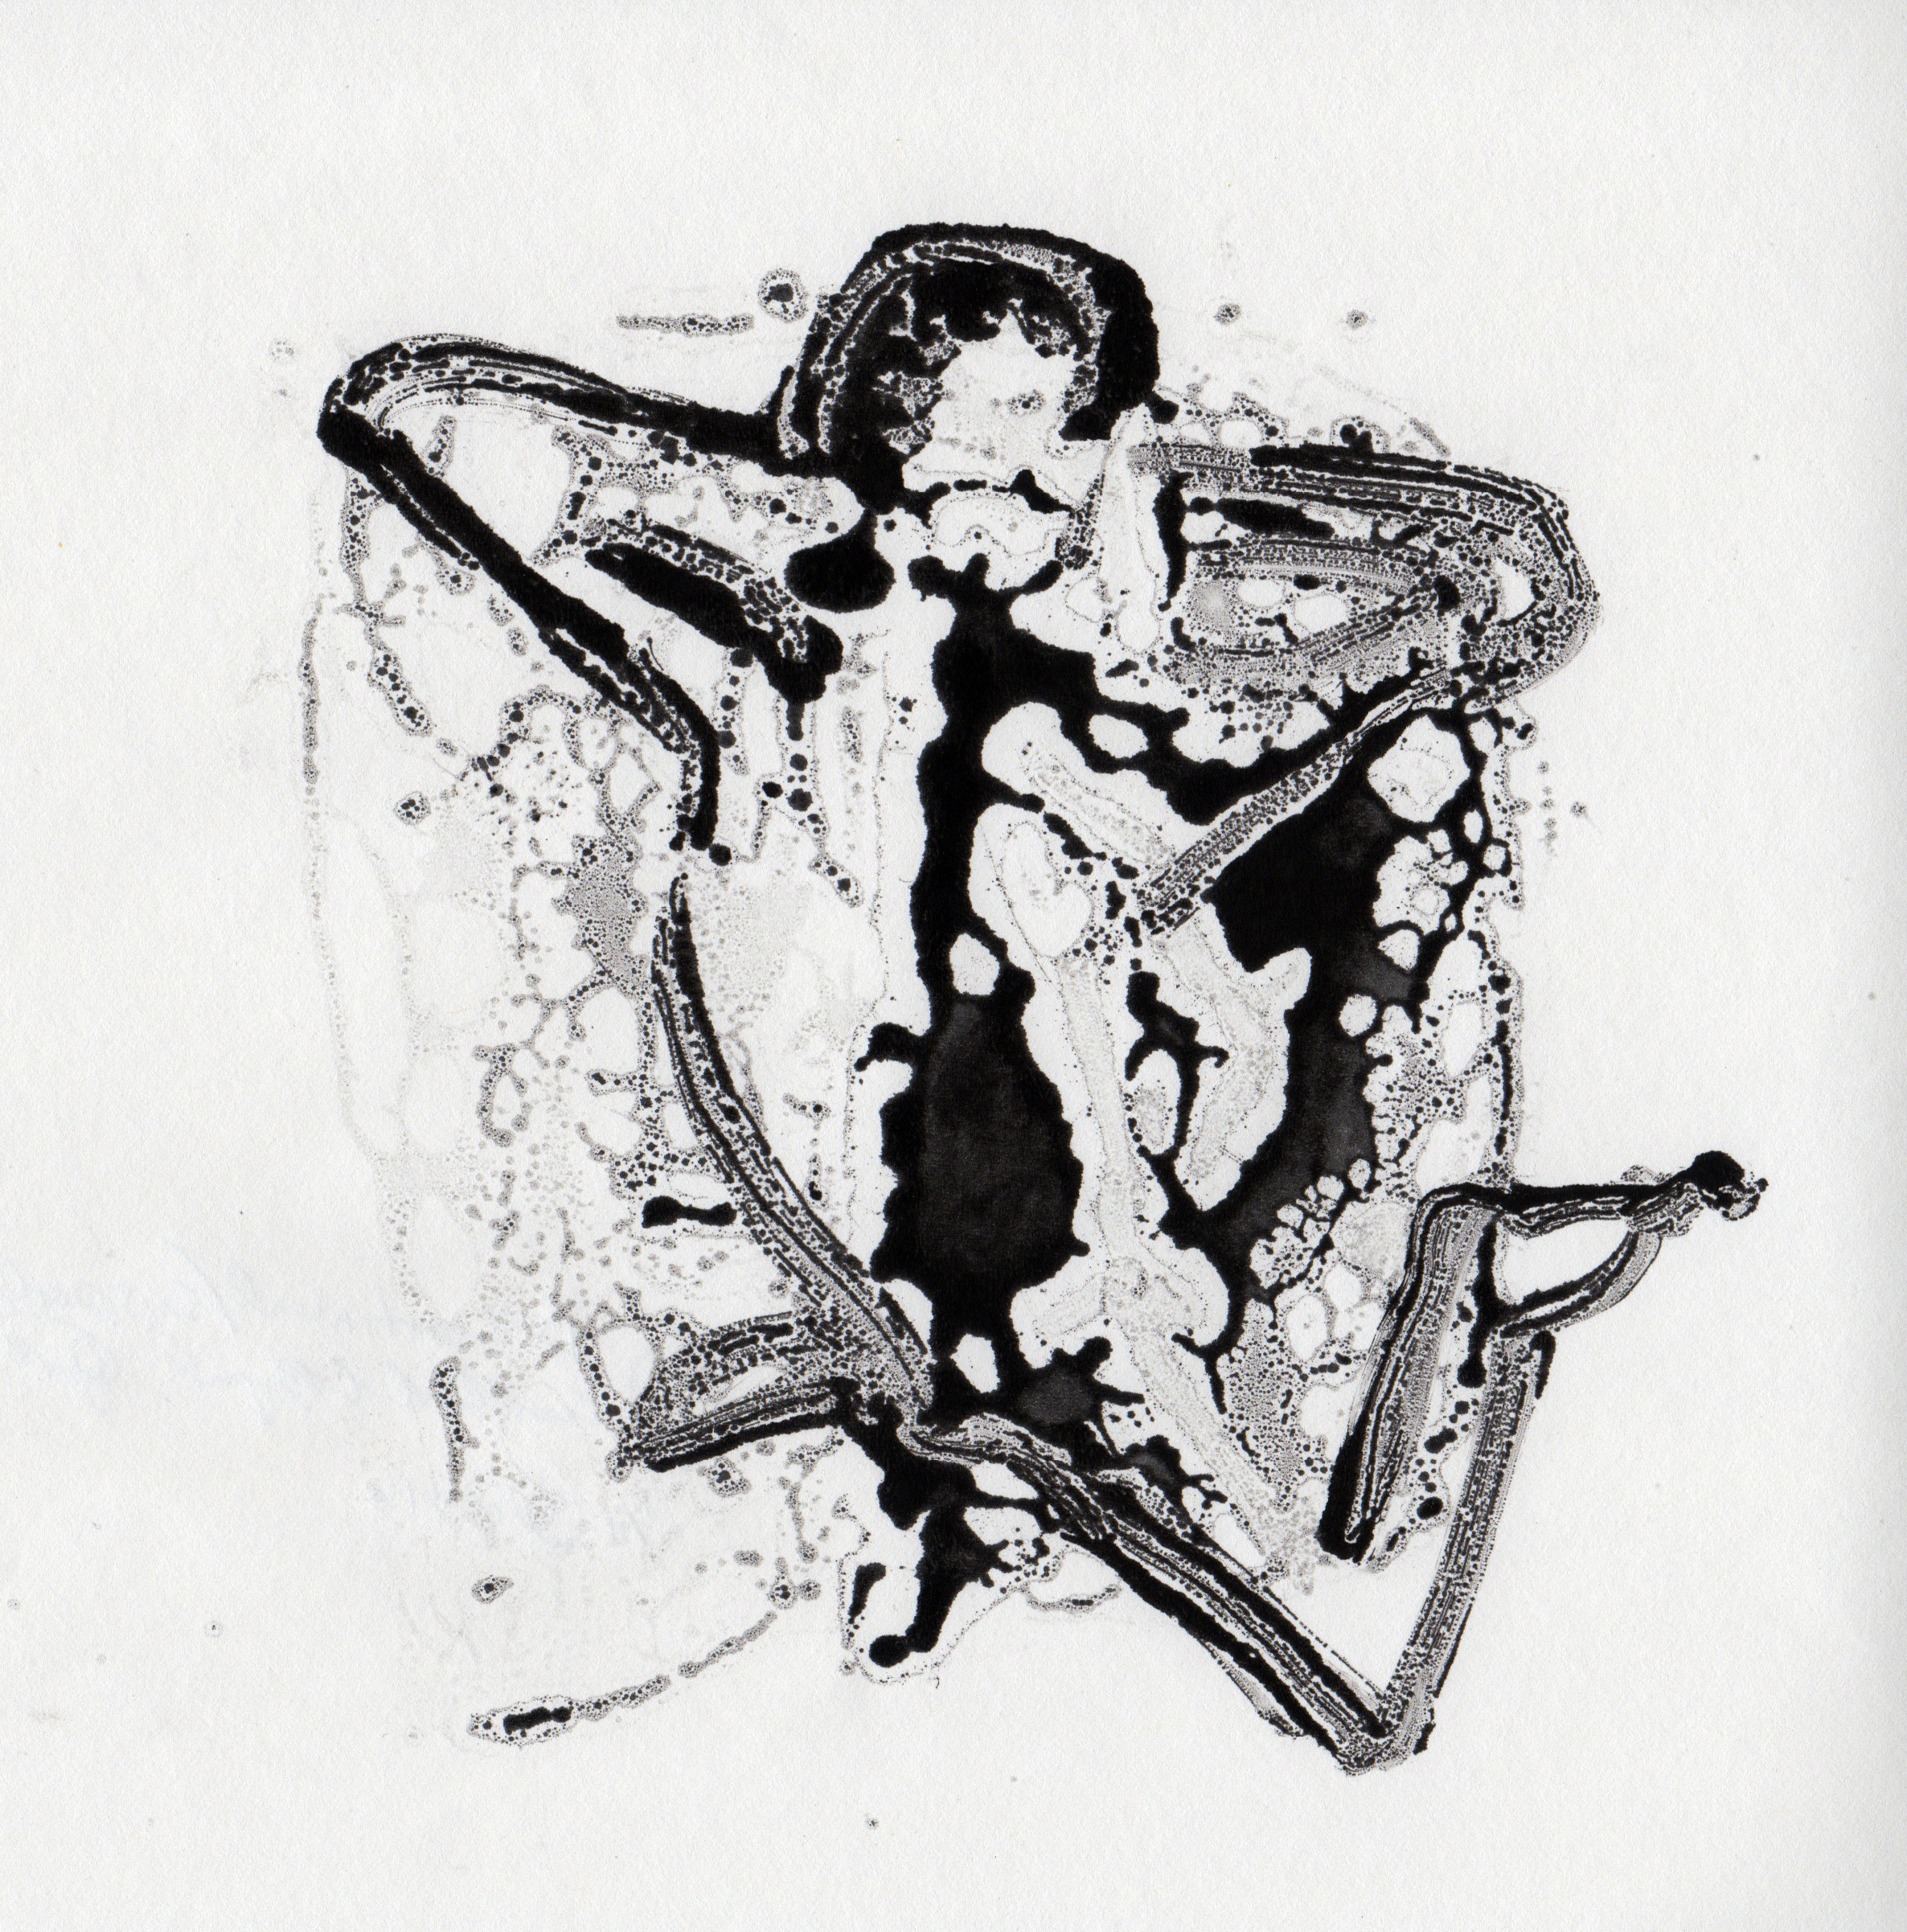 Discontinued Suspended, 2014, gelatin monotype, 10x9 inches